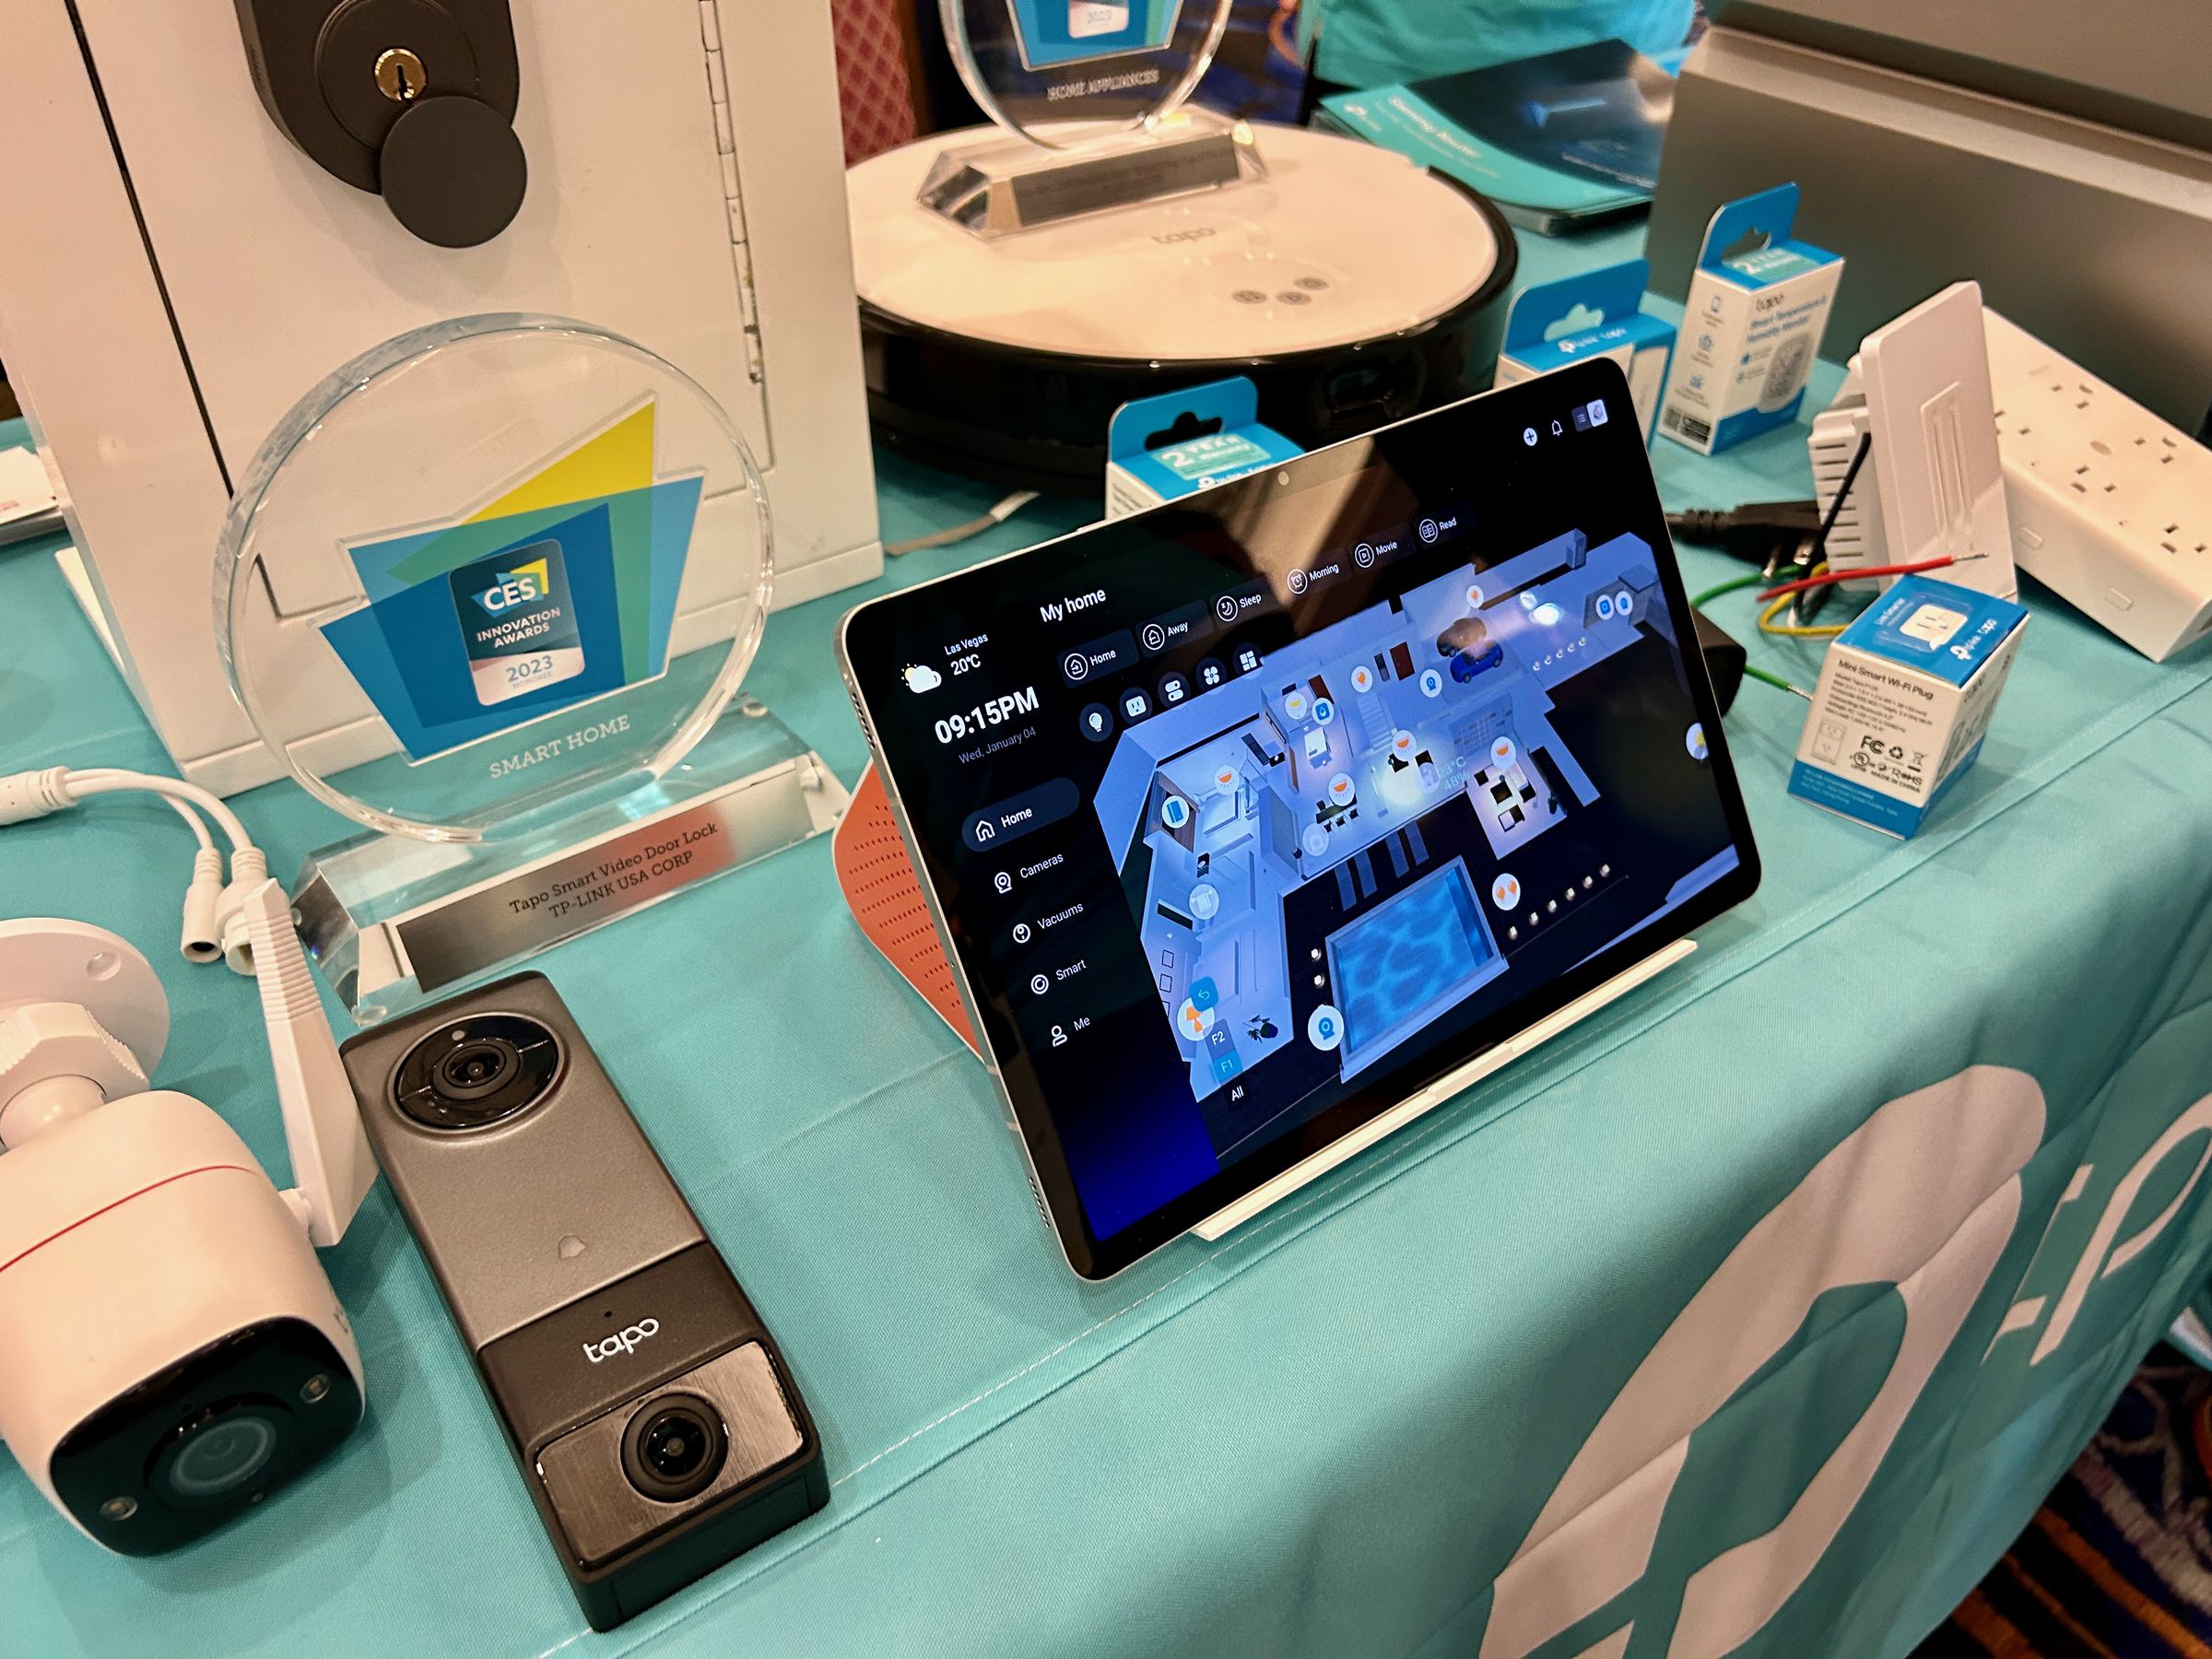 A table of products including cameras, doorbells and a big tablet leaning on an orange hub device.